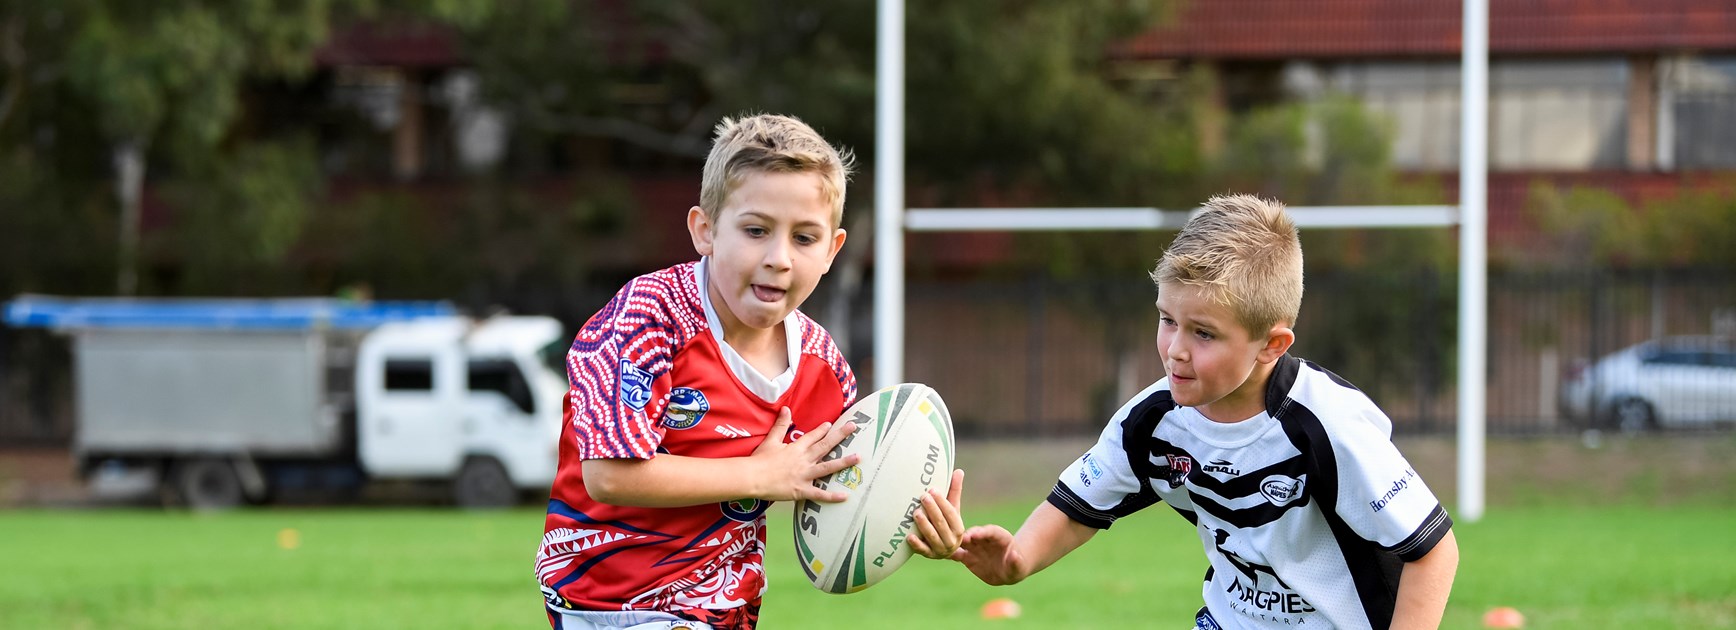 Rugby League in a Healthy State in NSW